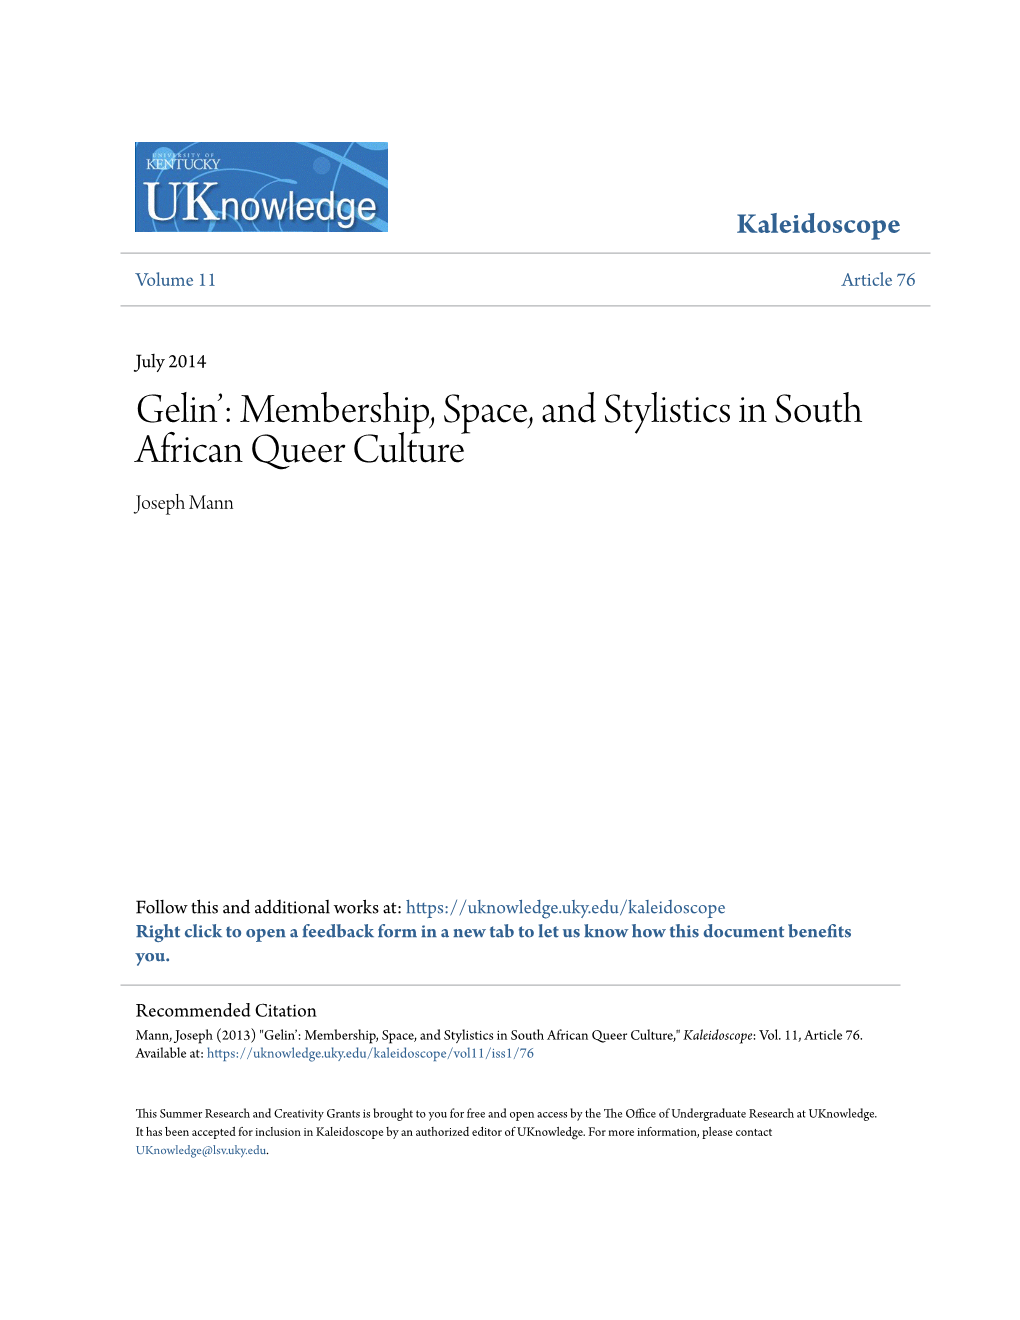 Membership, Space, and Stylistics in South African Queer Culture Joseph Mann